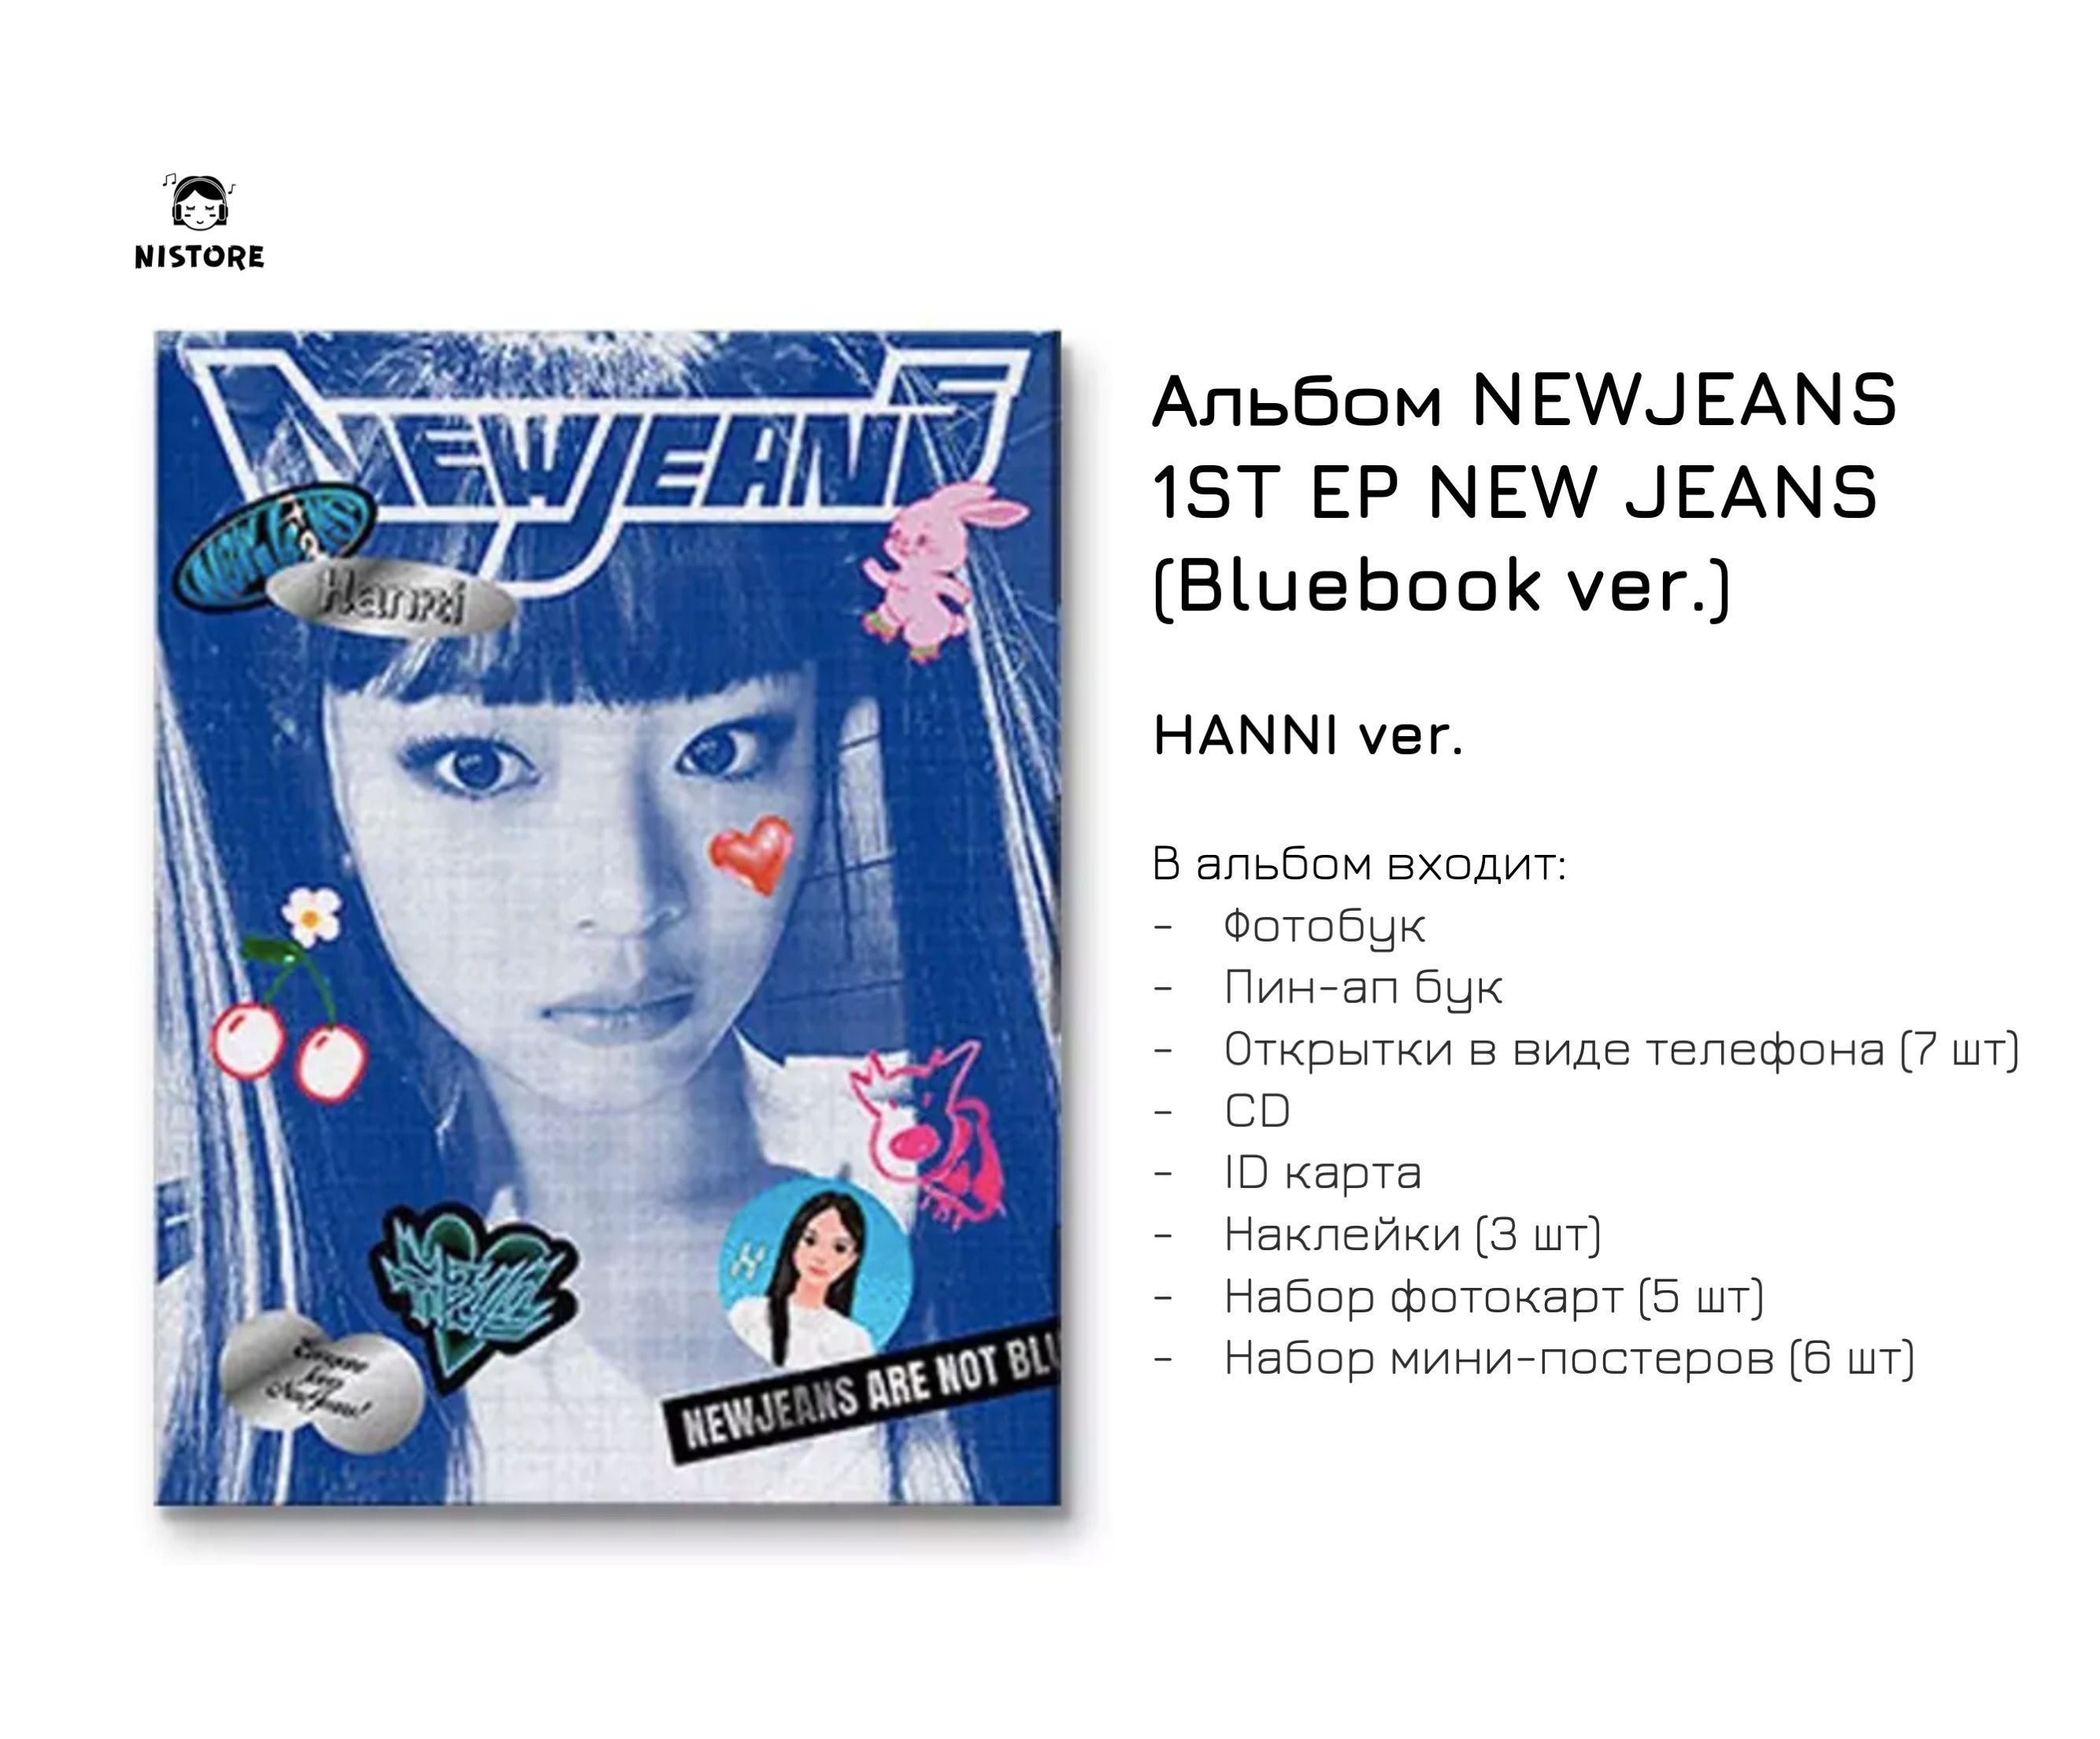 NewJeans - New Jeans 1st EP (Bluebook ver.)